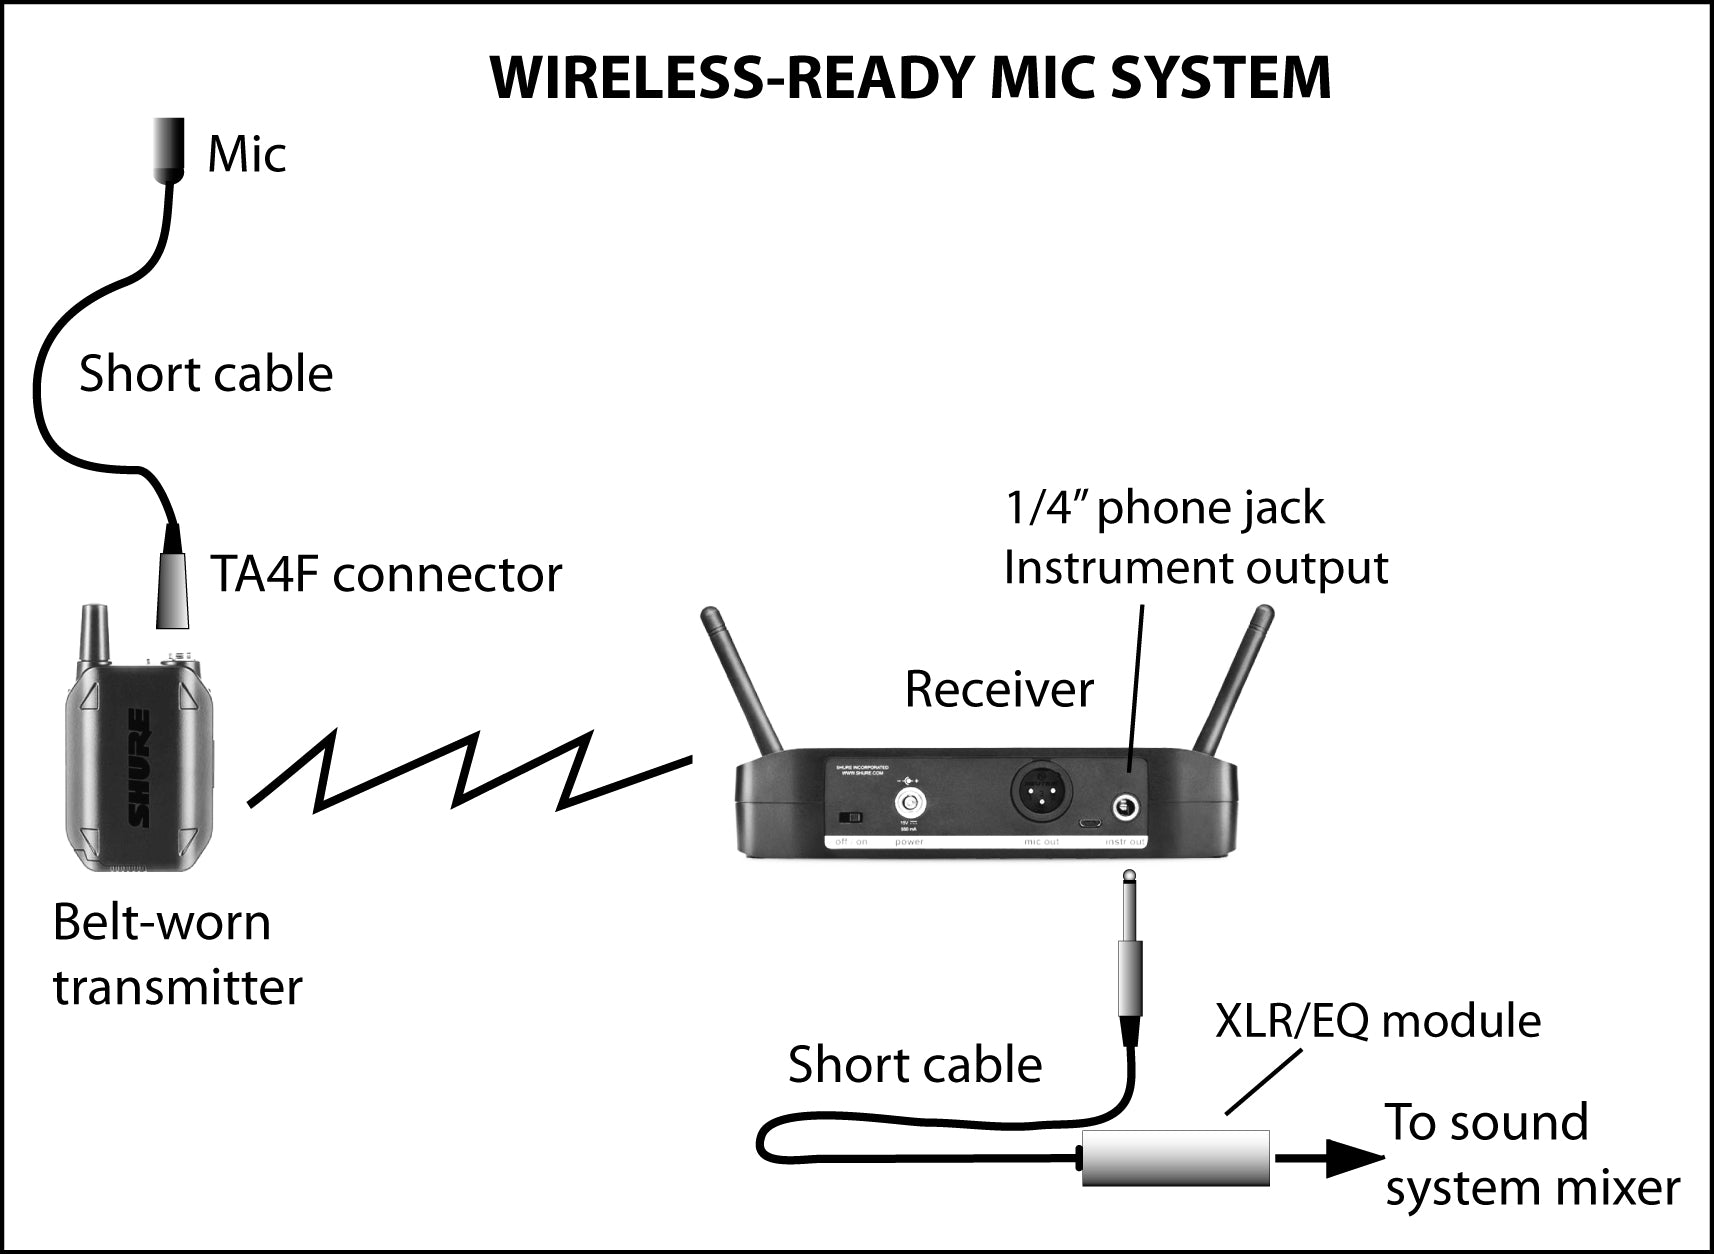 Bartlett wireless-ready mic system. You supply a Shure wireless transmitter and receiver.